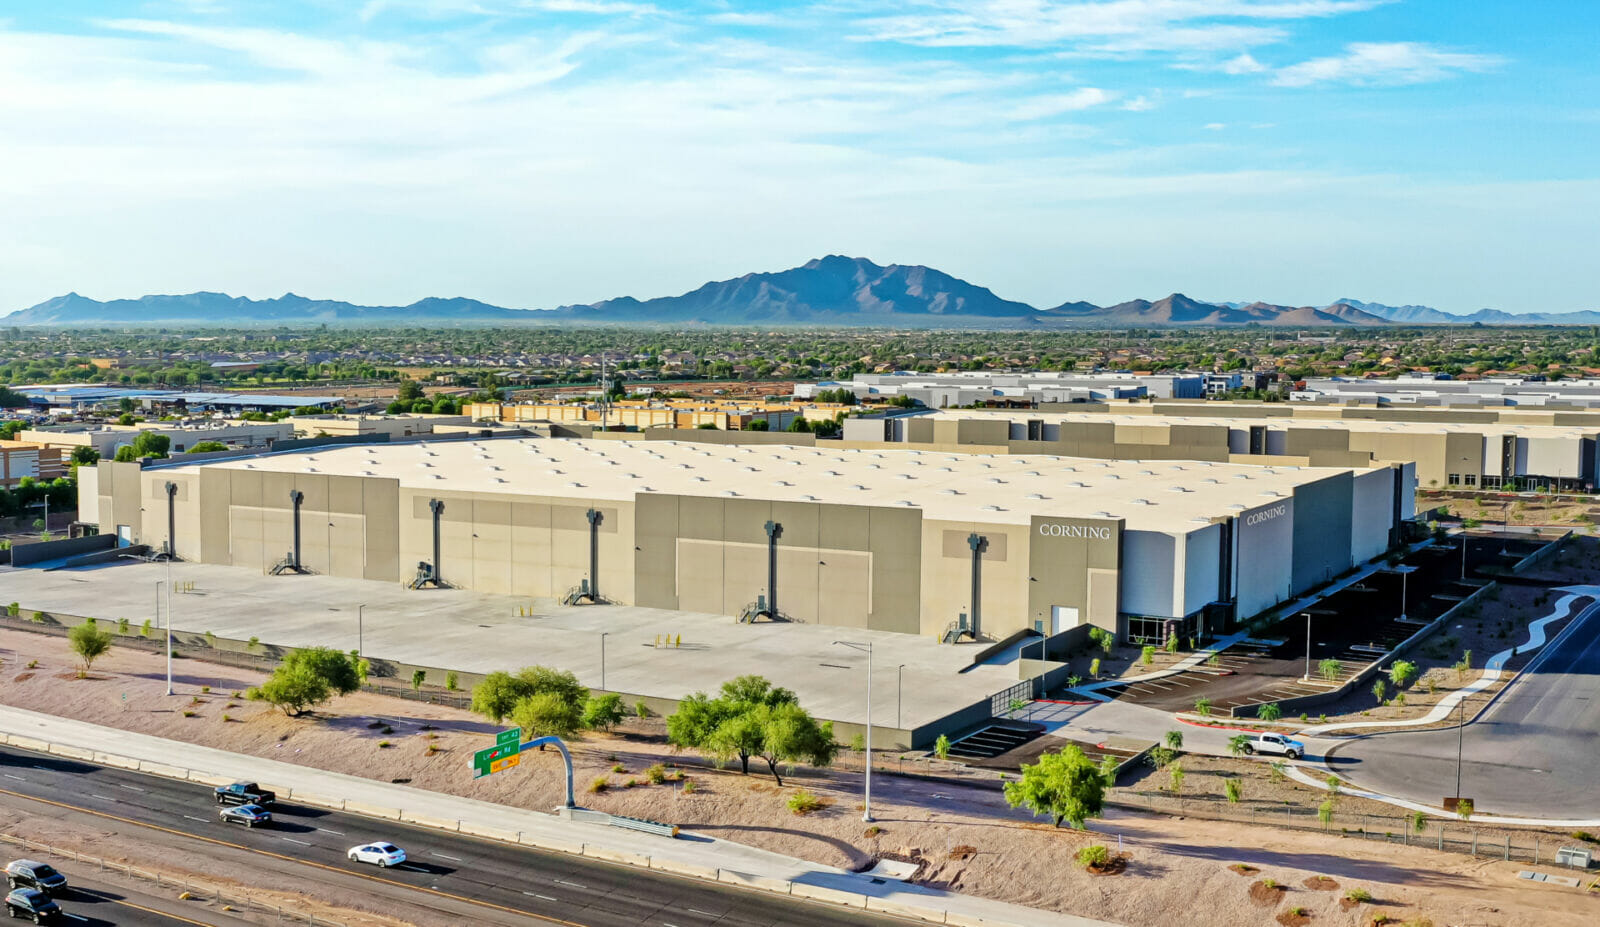 8-facts-about-prominent-industries-and-economic-development-in-avondale-arizona